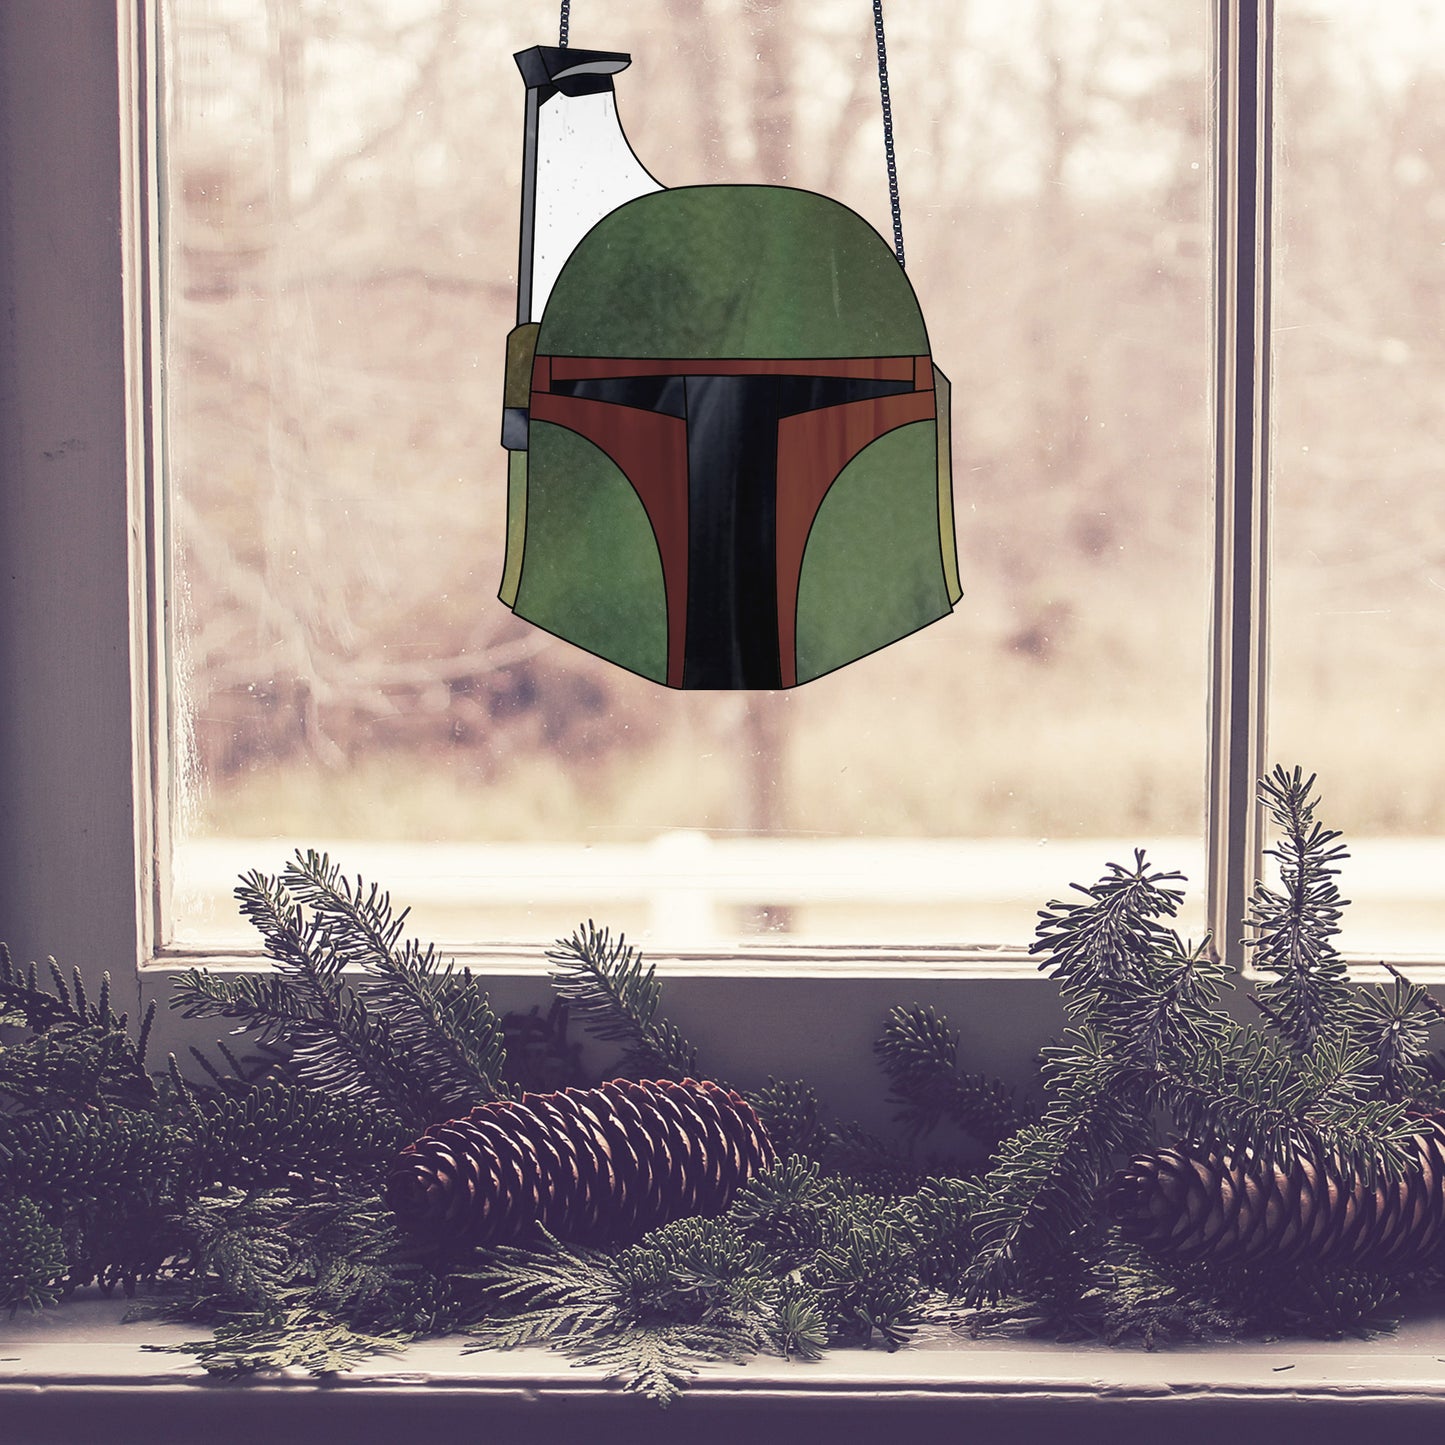 Boba Fett Star Wars stained glass pattern, instant pdf download, shown in window with pine cones